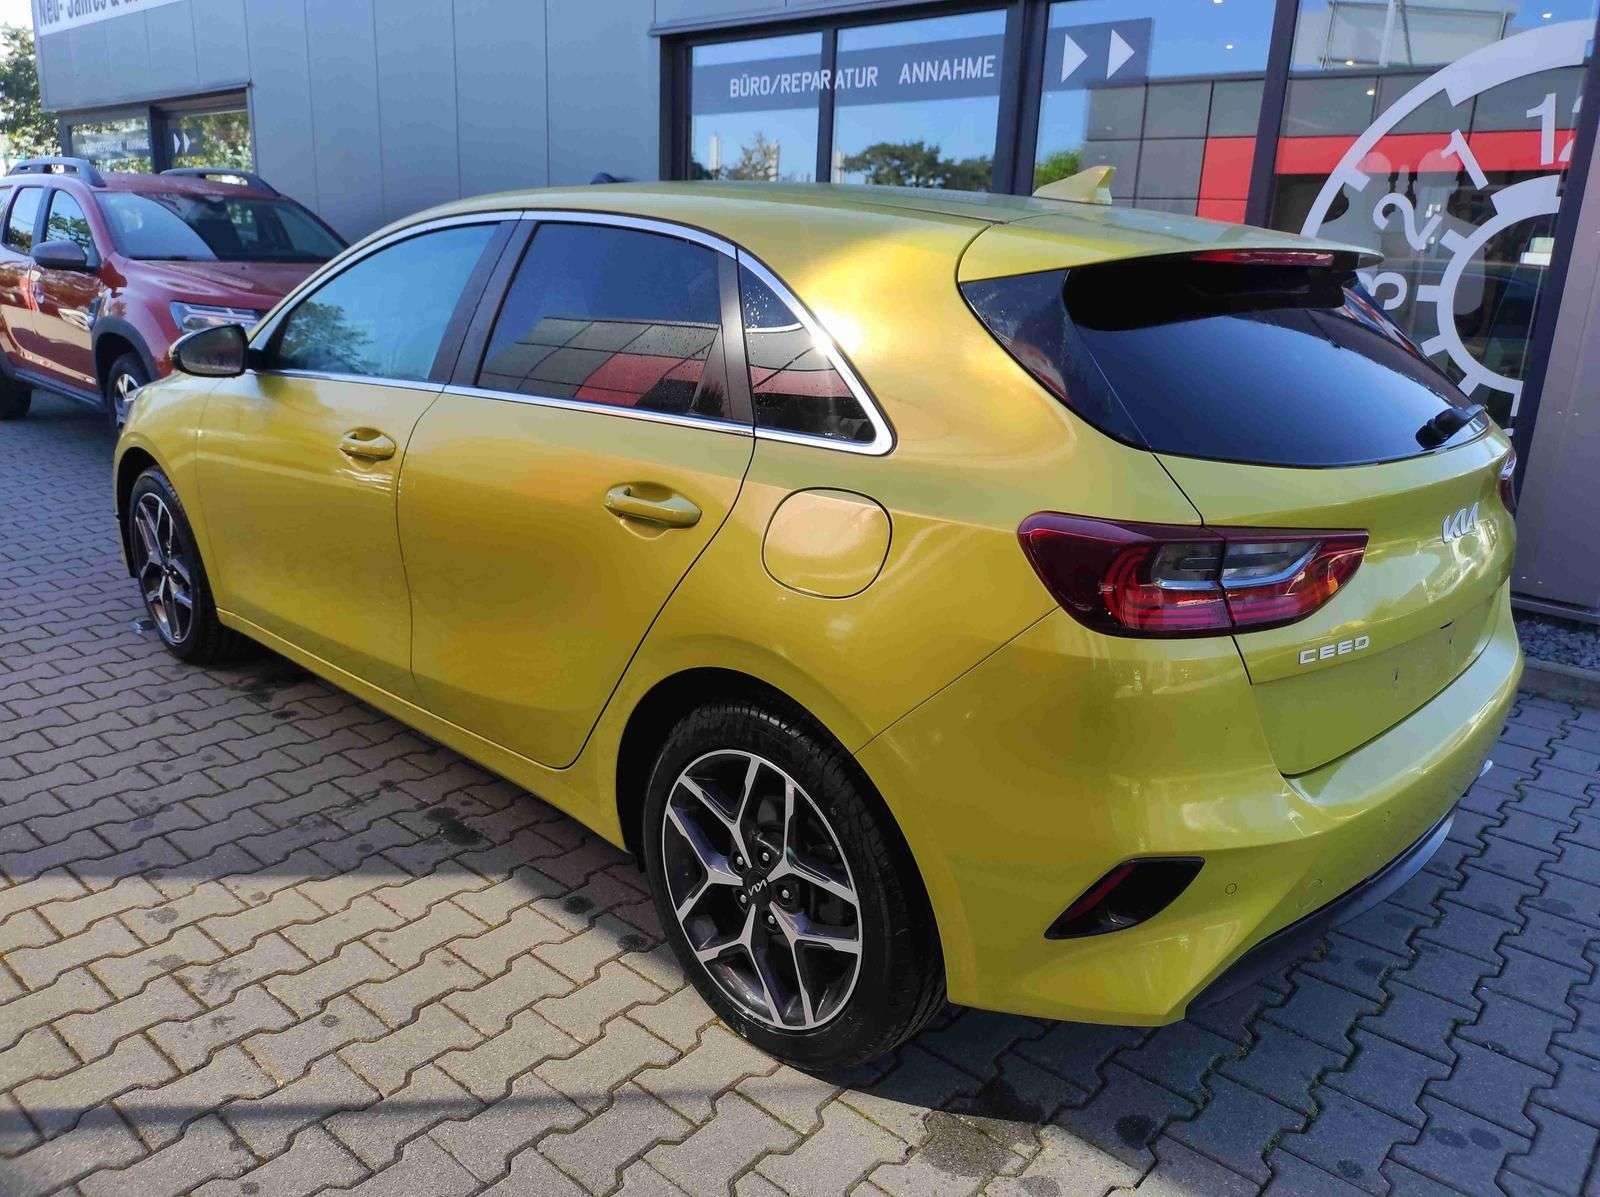 Kia Ceed / cee'd Sedan in Yellow pre-registered in Polch for € 23,390.-